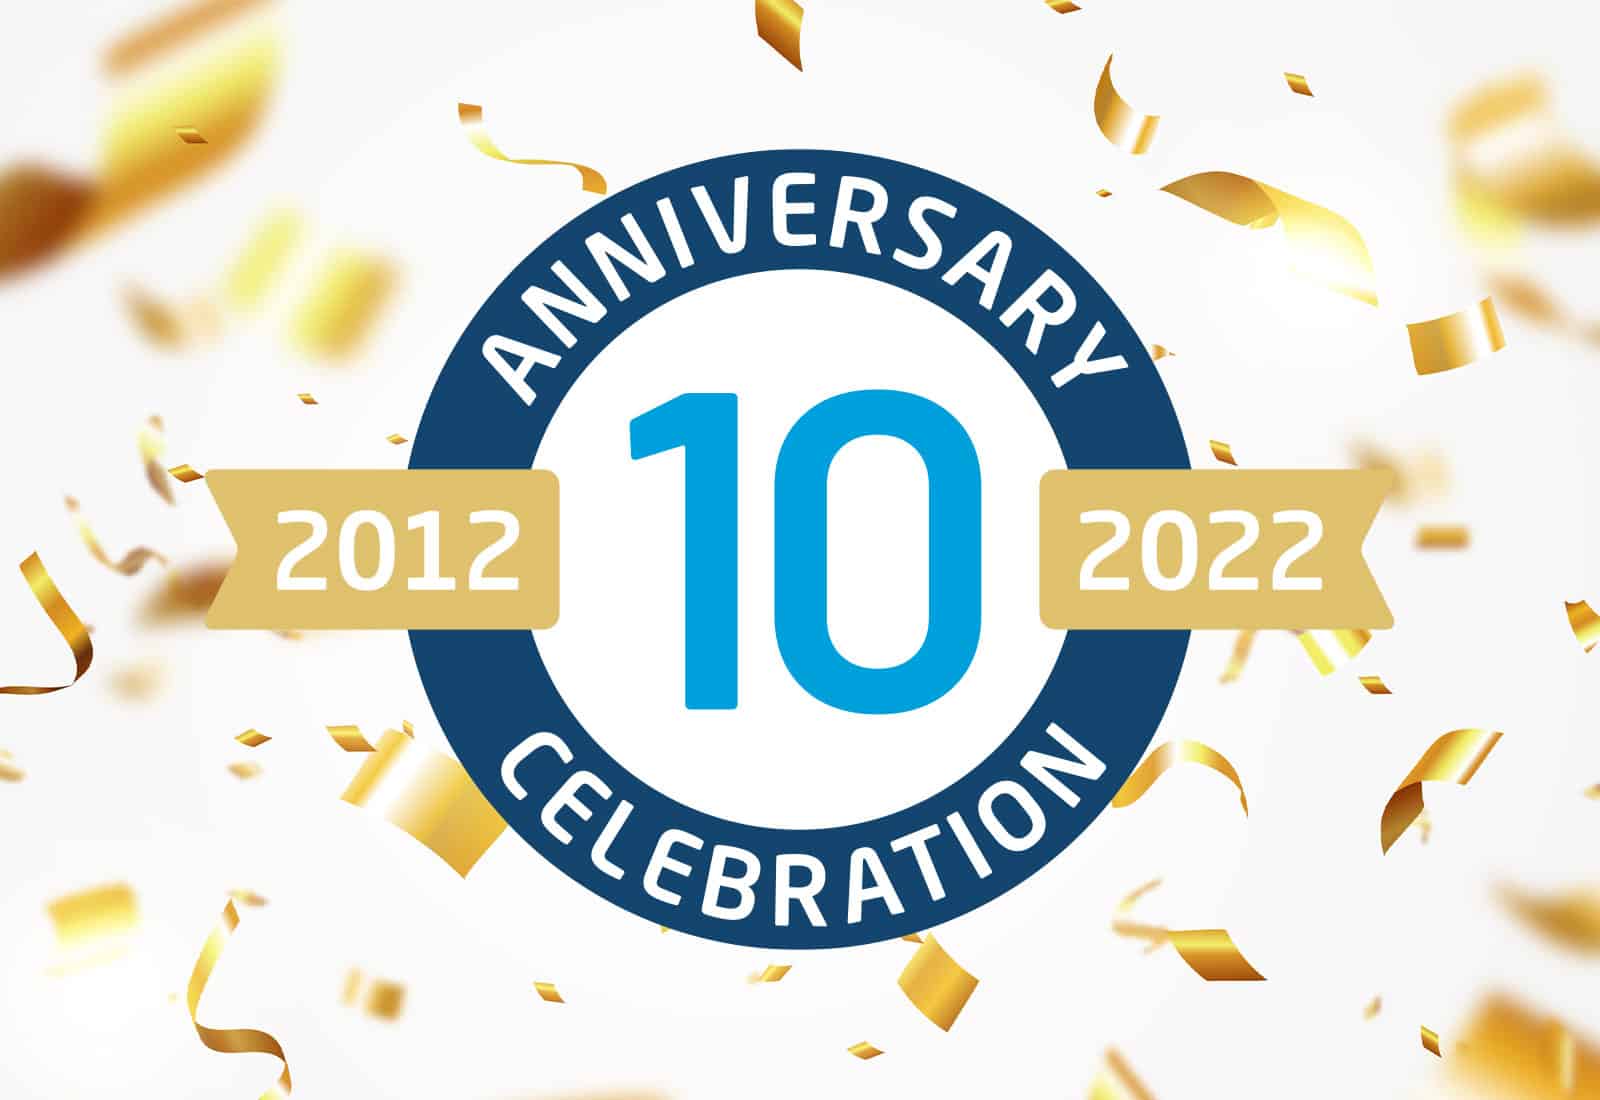 Celebrate our 10th anniversary with 10% off